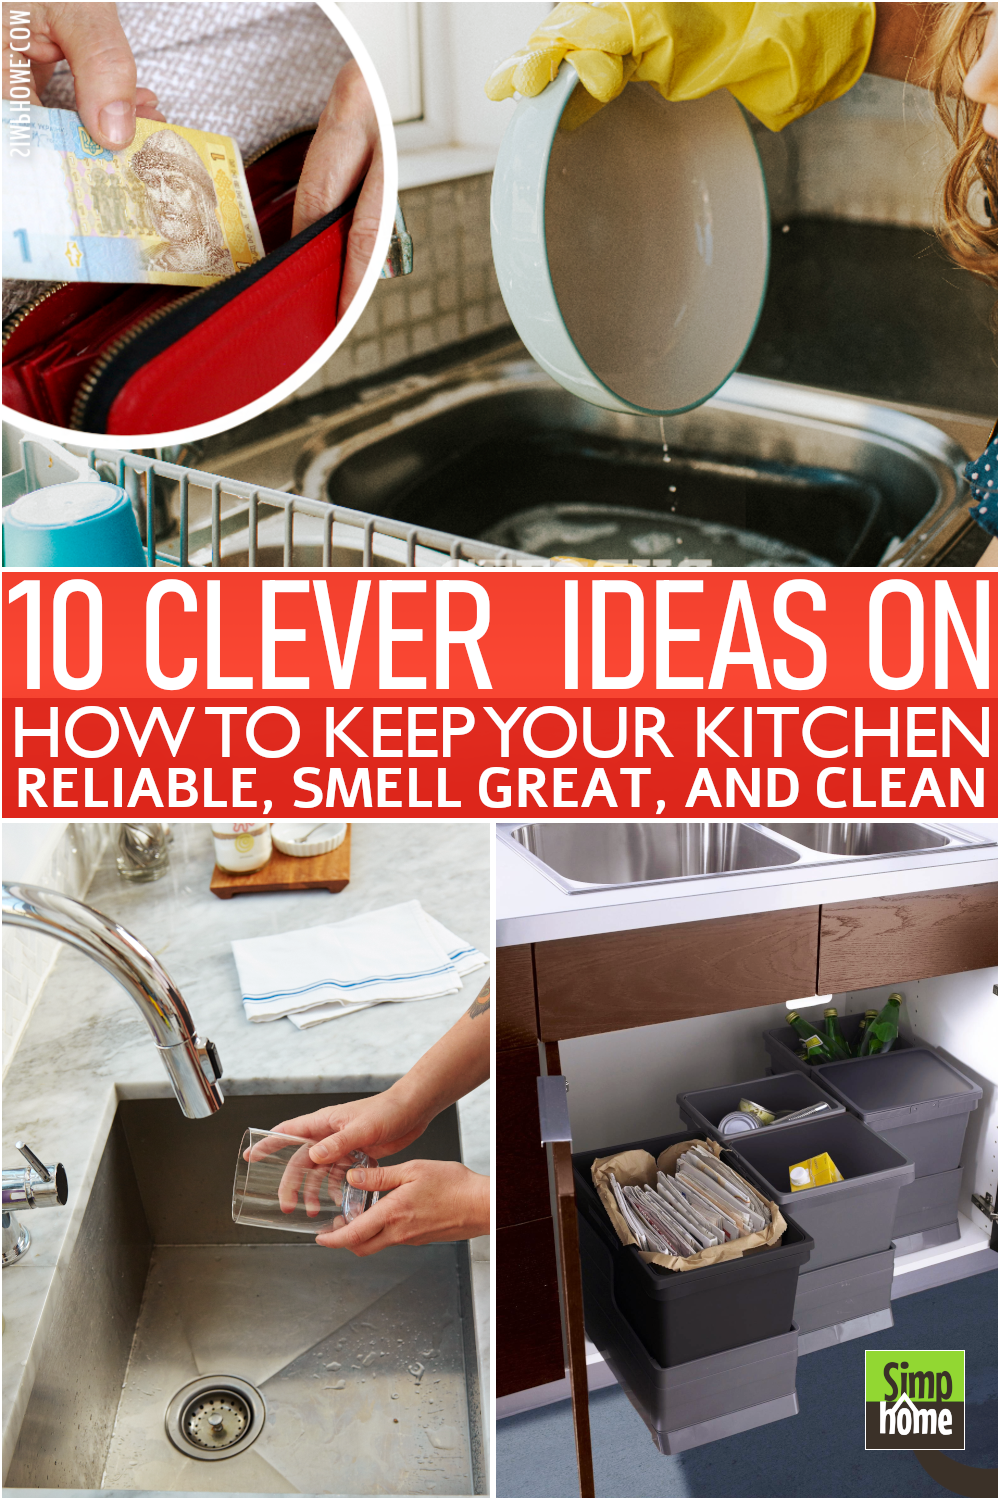 Clever ideas on how to keep a kitchen reliable and clean via Simphome.com